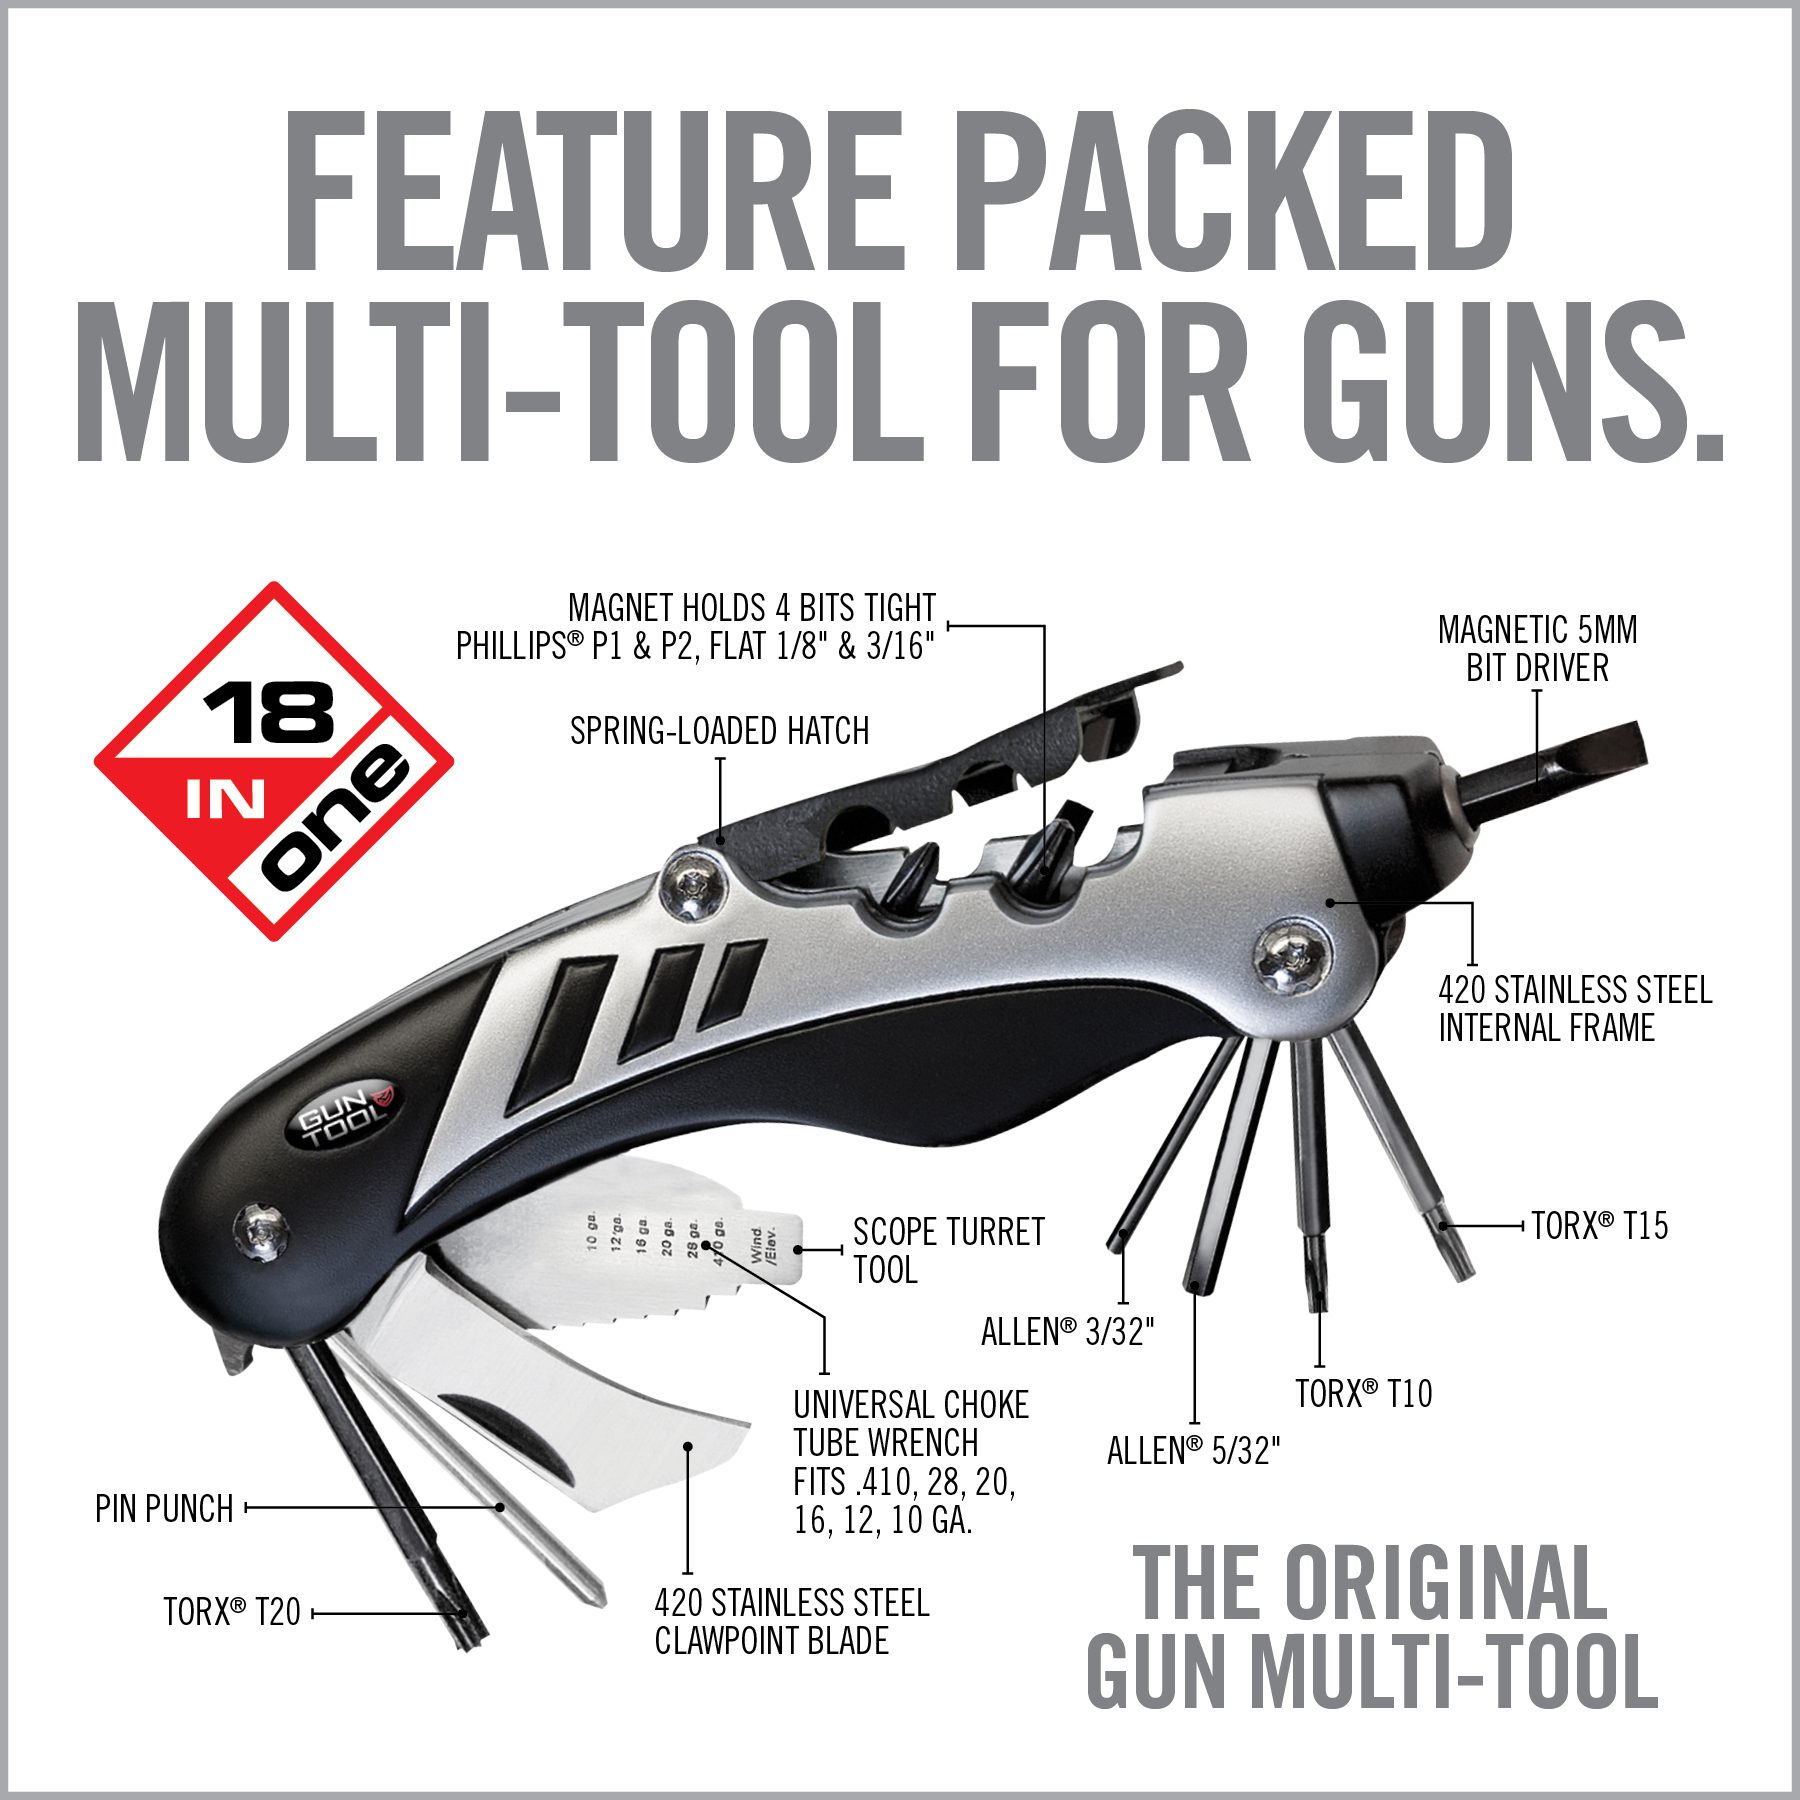 the features of a multi - tool for guns